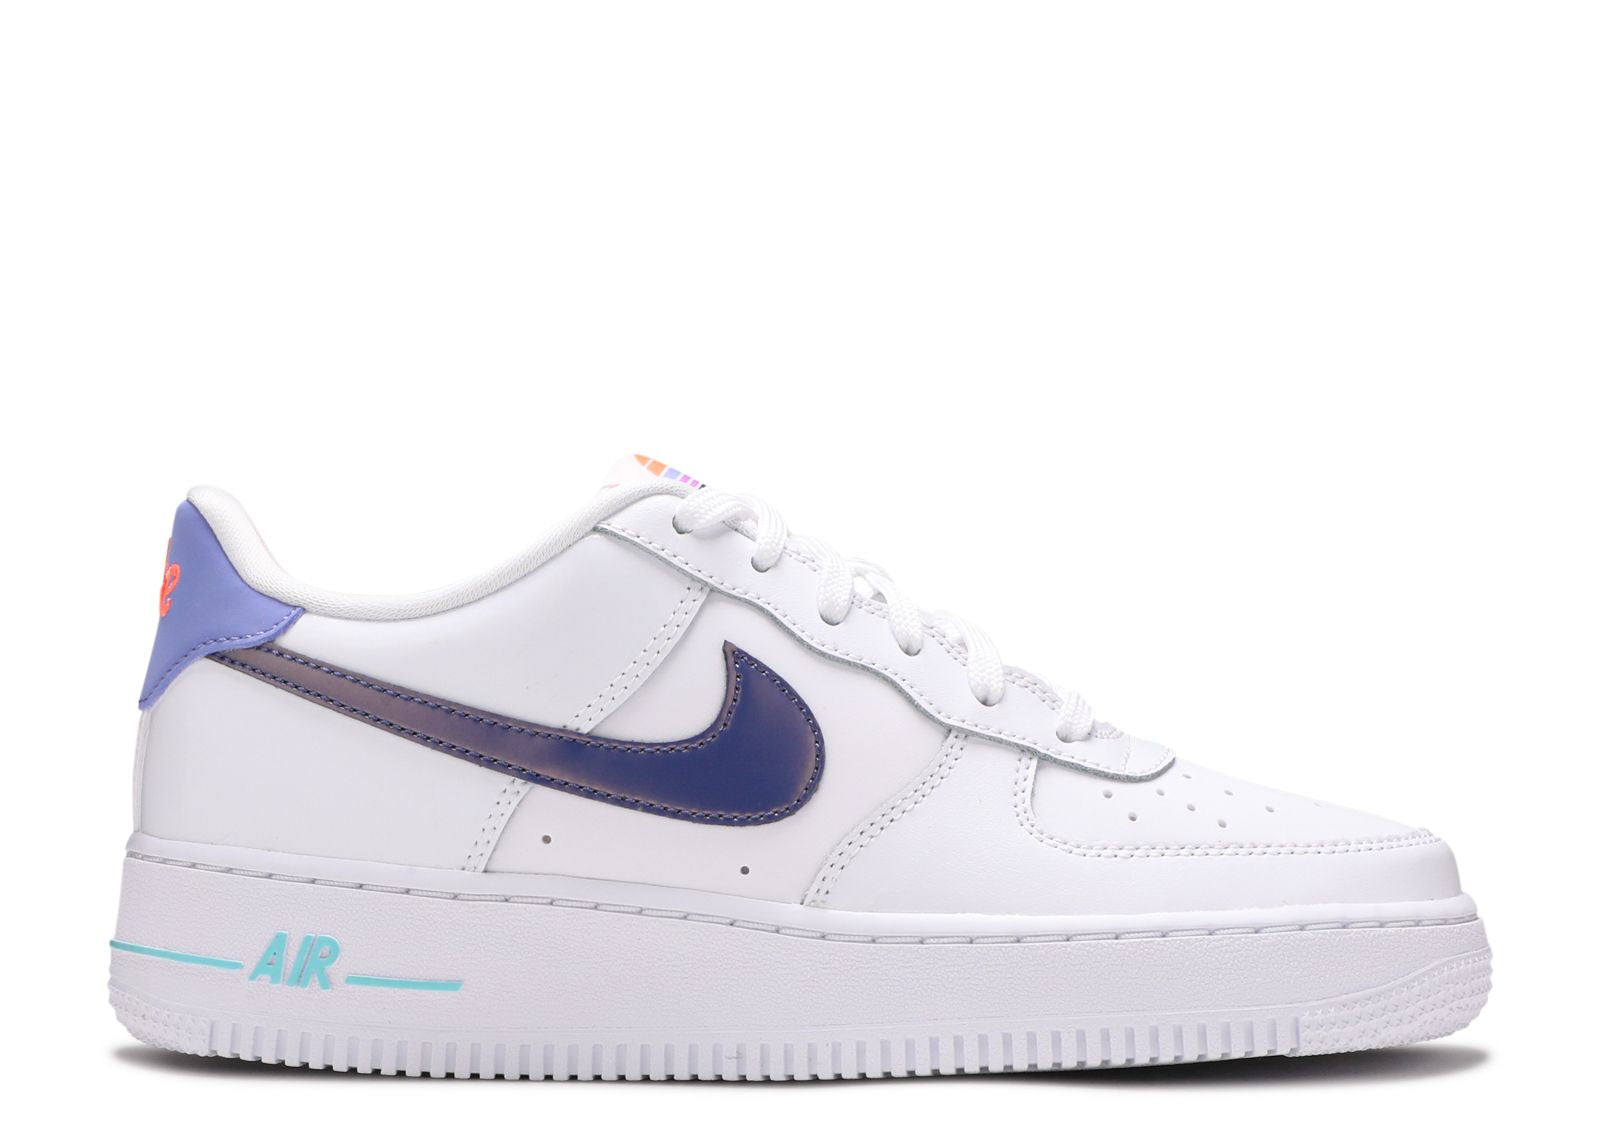 Second Chance - motors Nike Air Force 1 White Dark Purple Dust (GS) - 38 | NEW